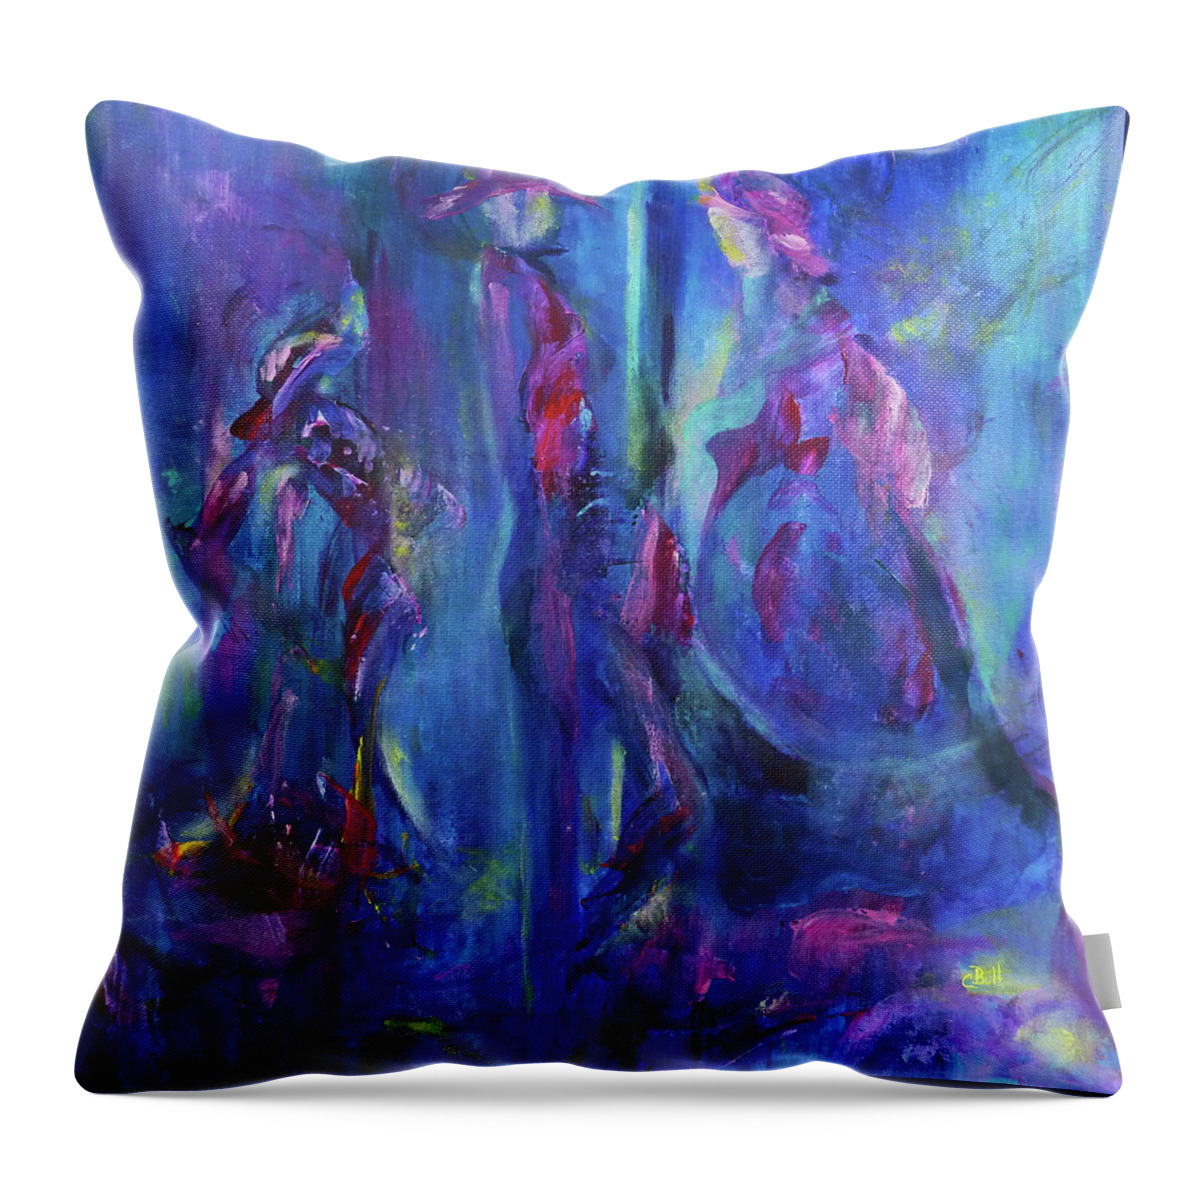 Figures Throw Pillow featuring the painting The Conversation by Claire Bull